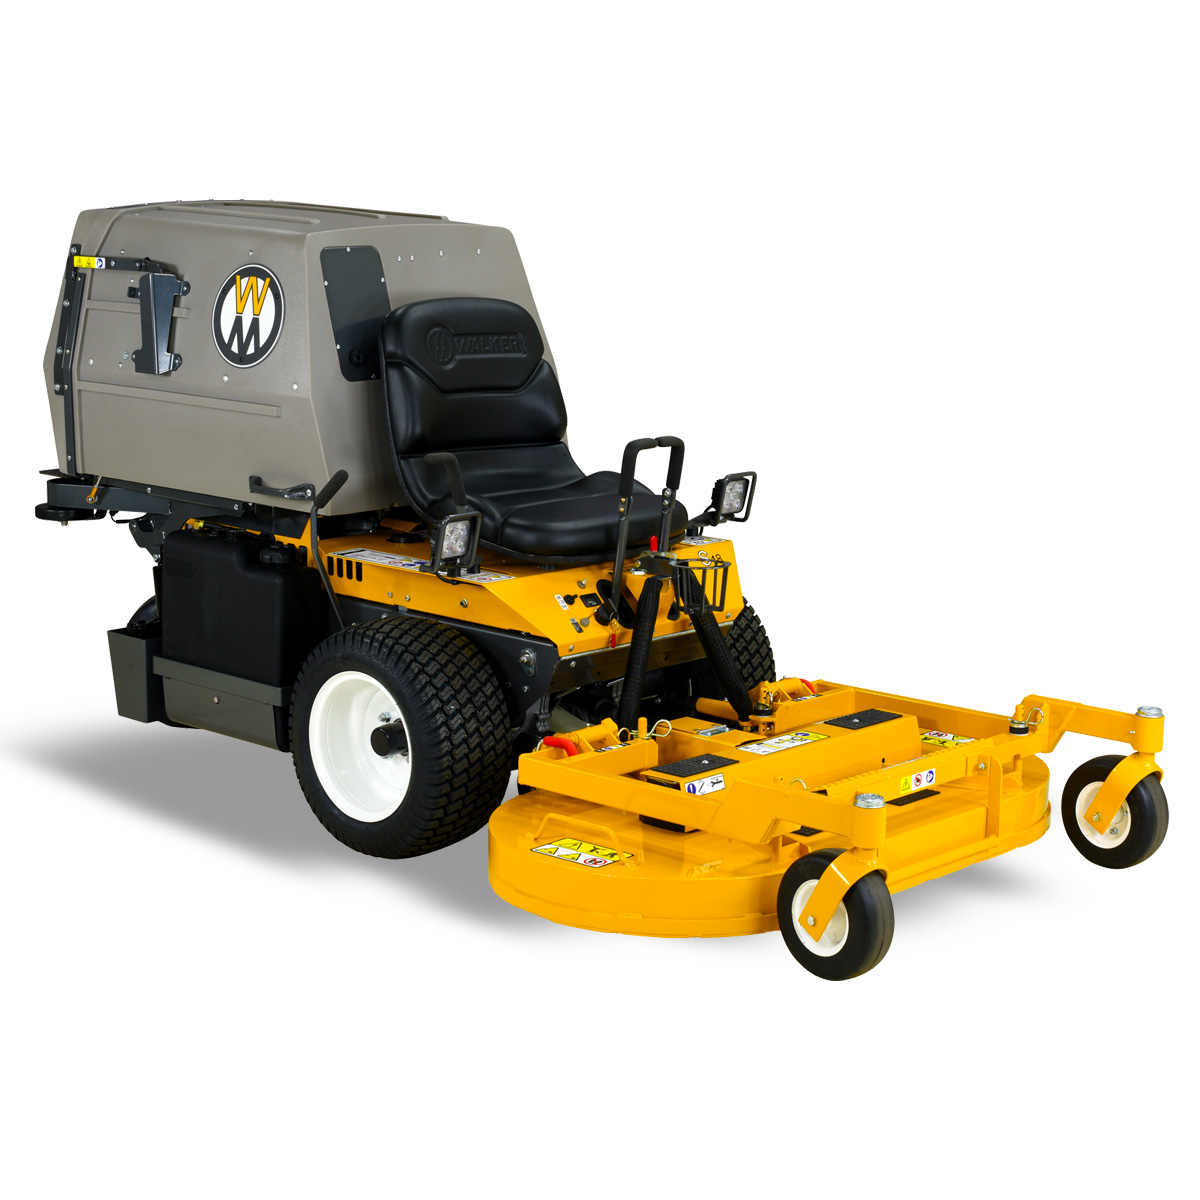 Walker Mower grass collection model MS18 - entry machine